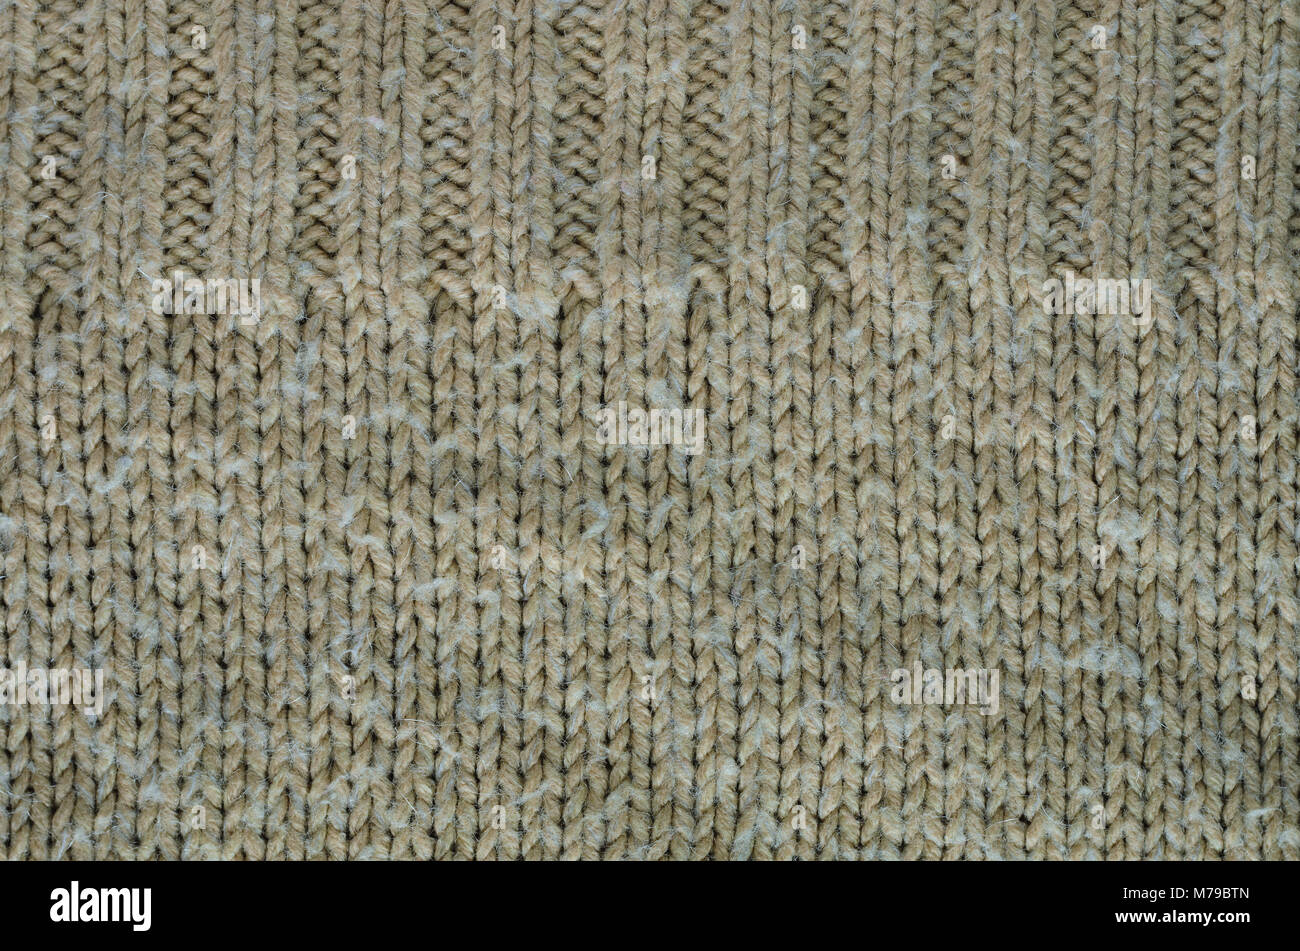 Gray Texture Of A Knitted Sweater With Two Types Of Knitting